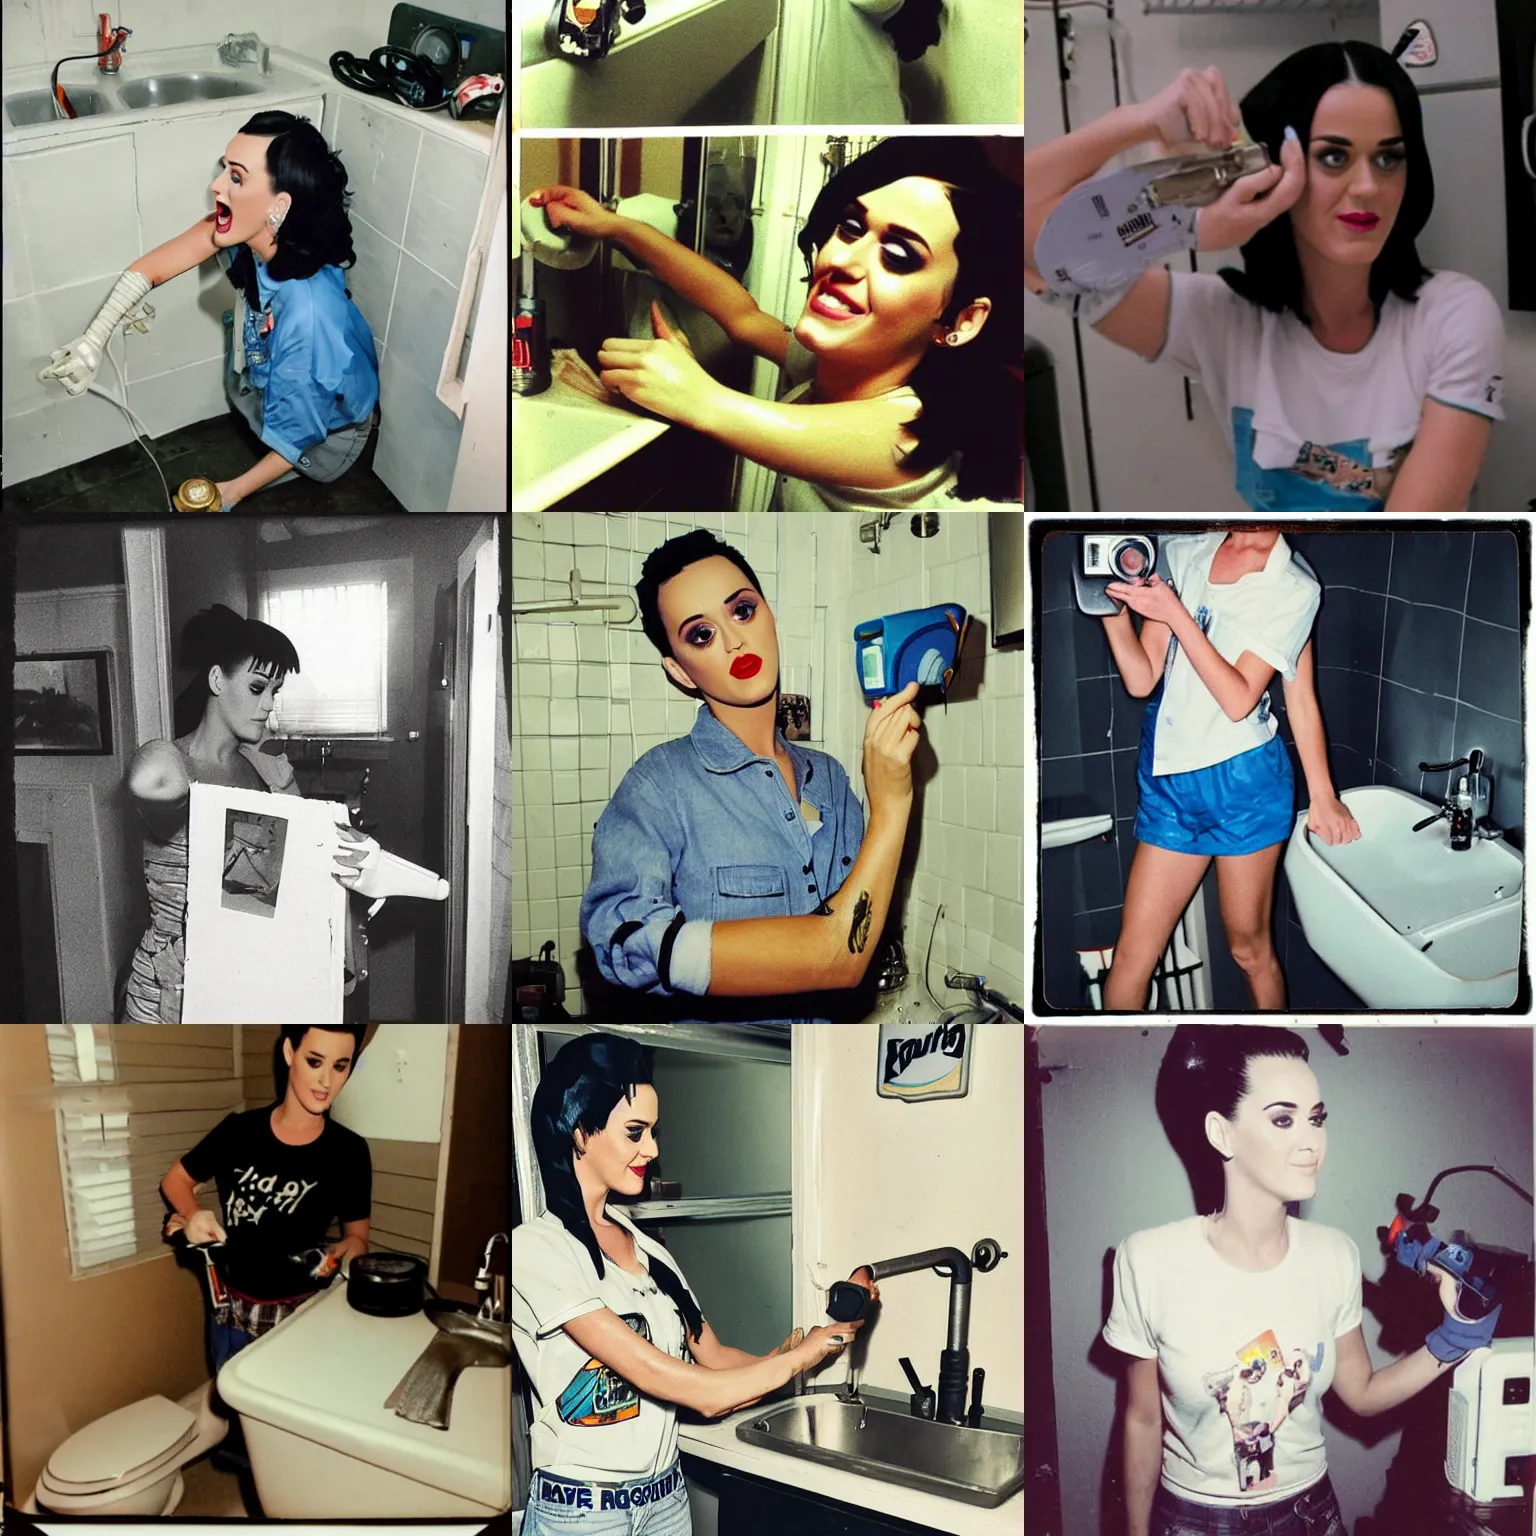 Prompt: katy perry fixing a leaking sink, wearing old shirt, using a wrench, polaroid photo